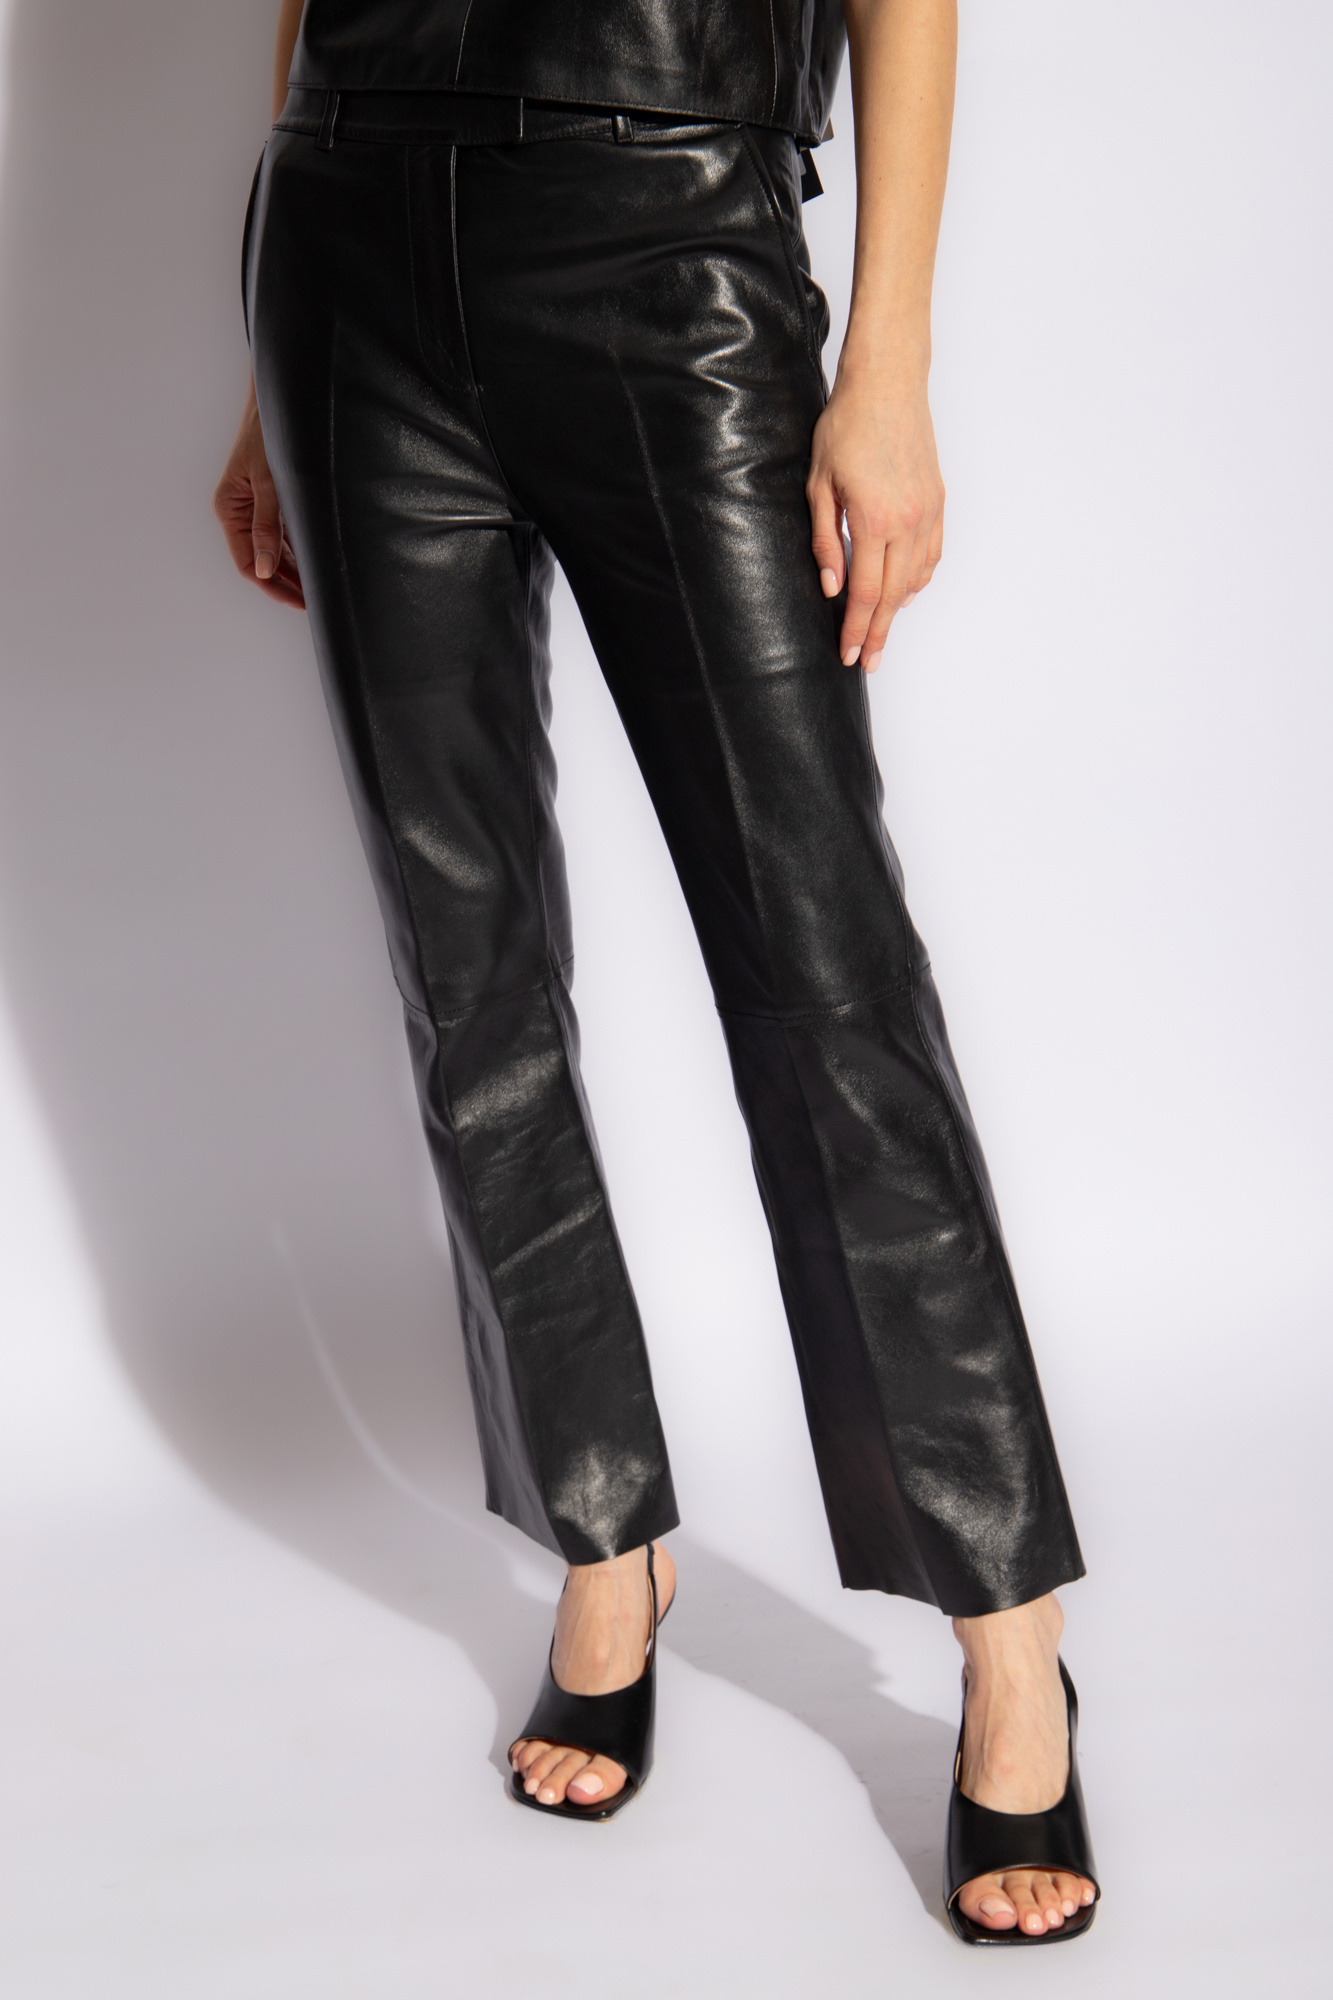 STAND STUDIO ‘Zia’ leather trousers